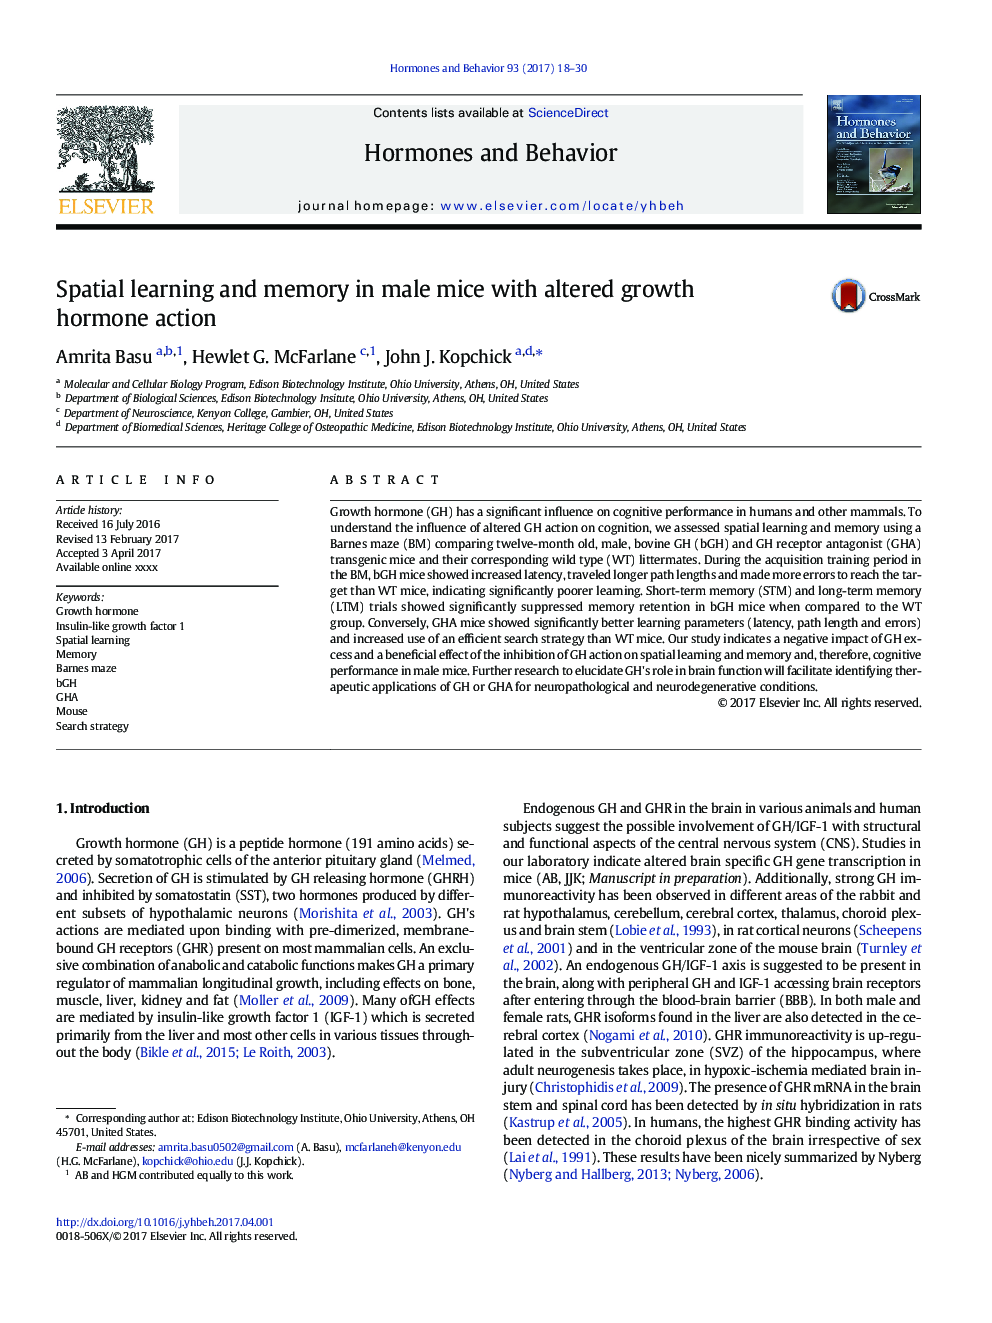 Spatial learning and memory in male mice with altered growth hormone action